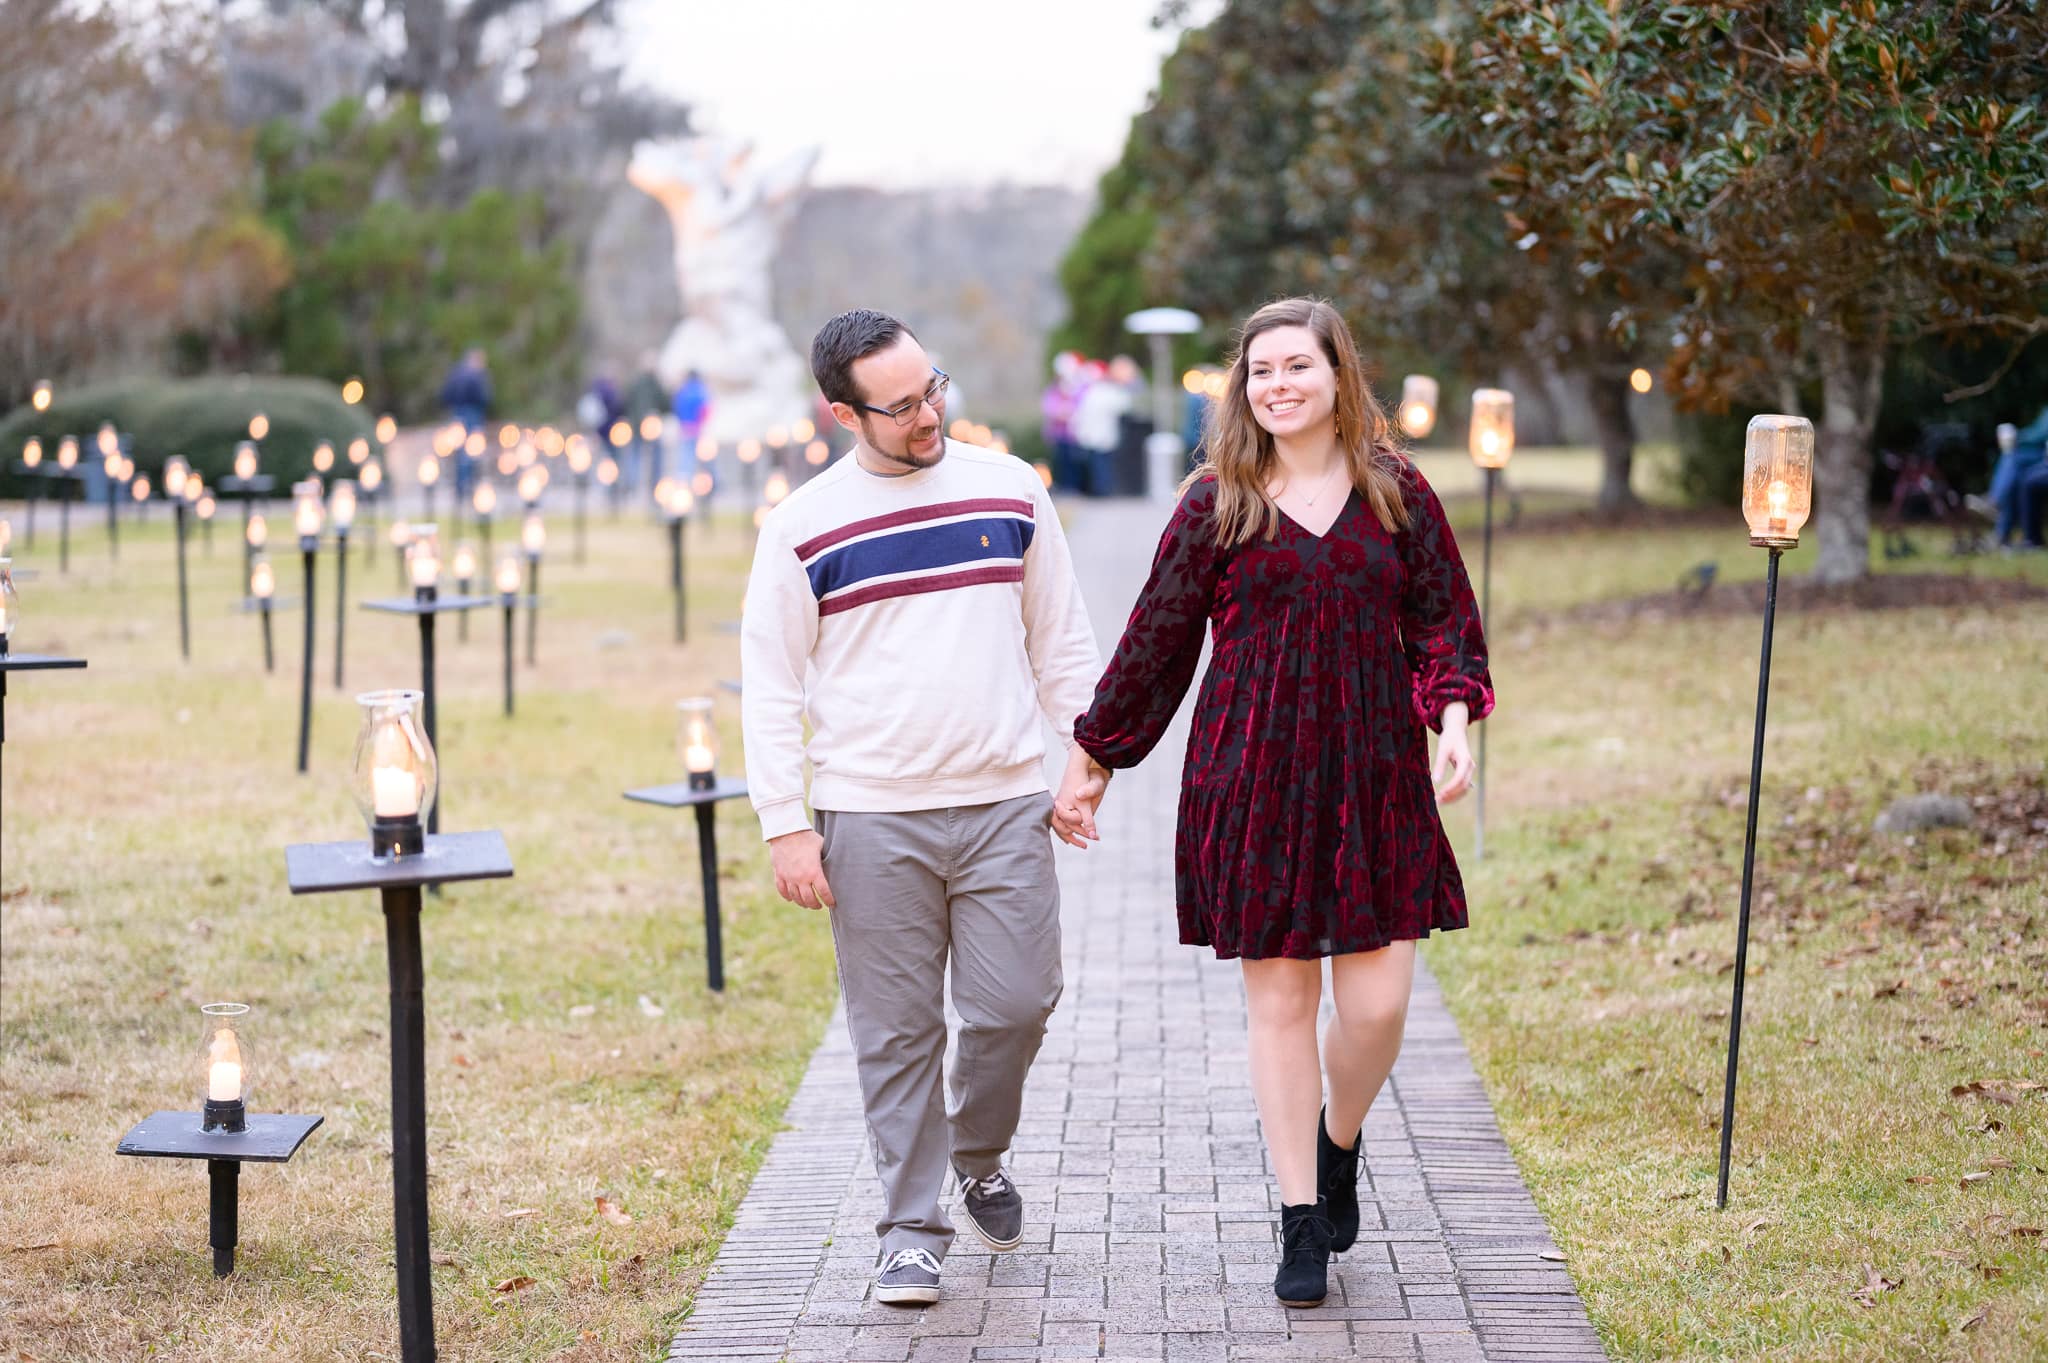 Walking together through the candles - Brookgreen Gardens